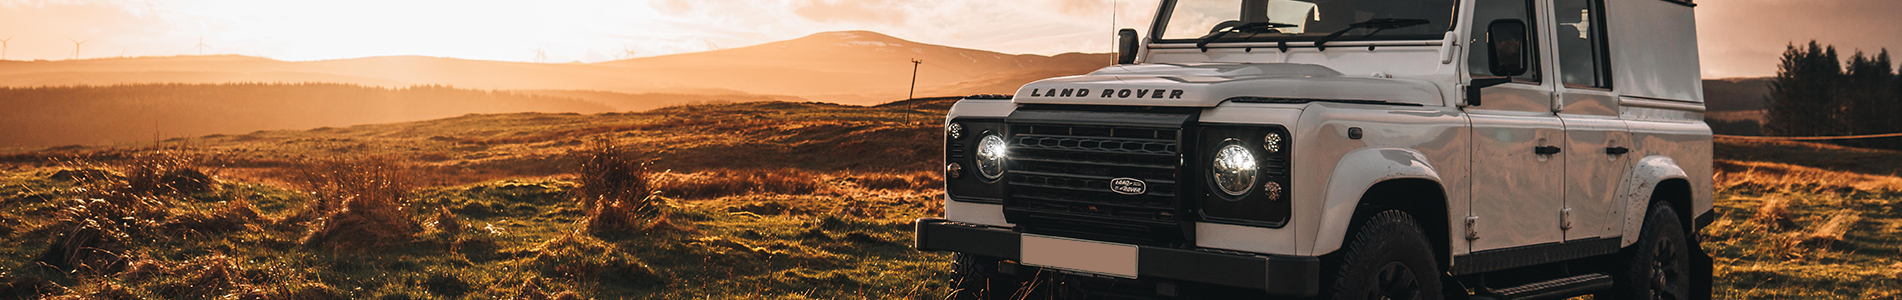 Thomas Performance Ltd, Land Rover Parts and Accessories.